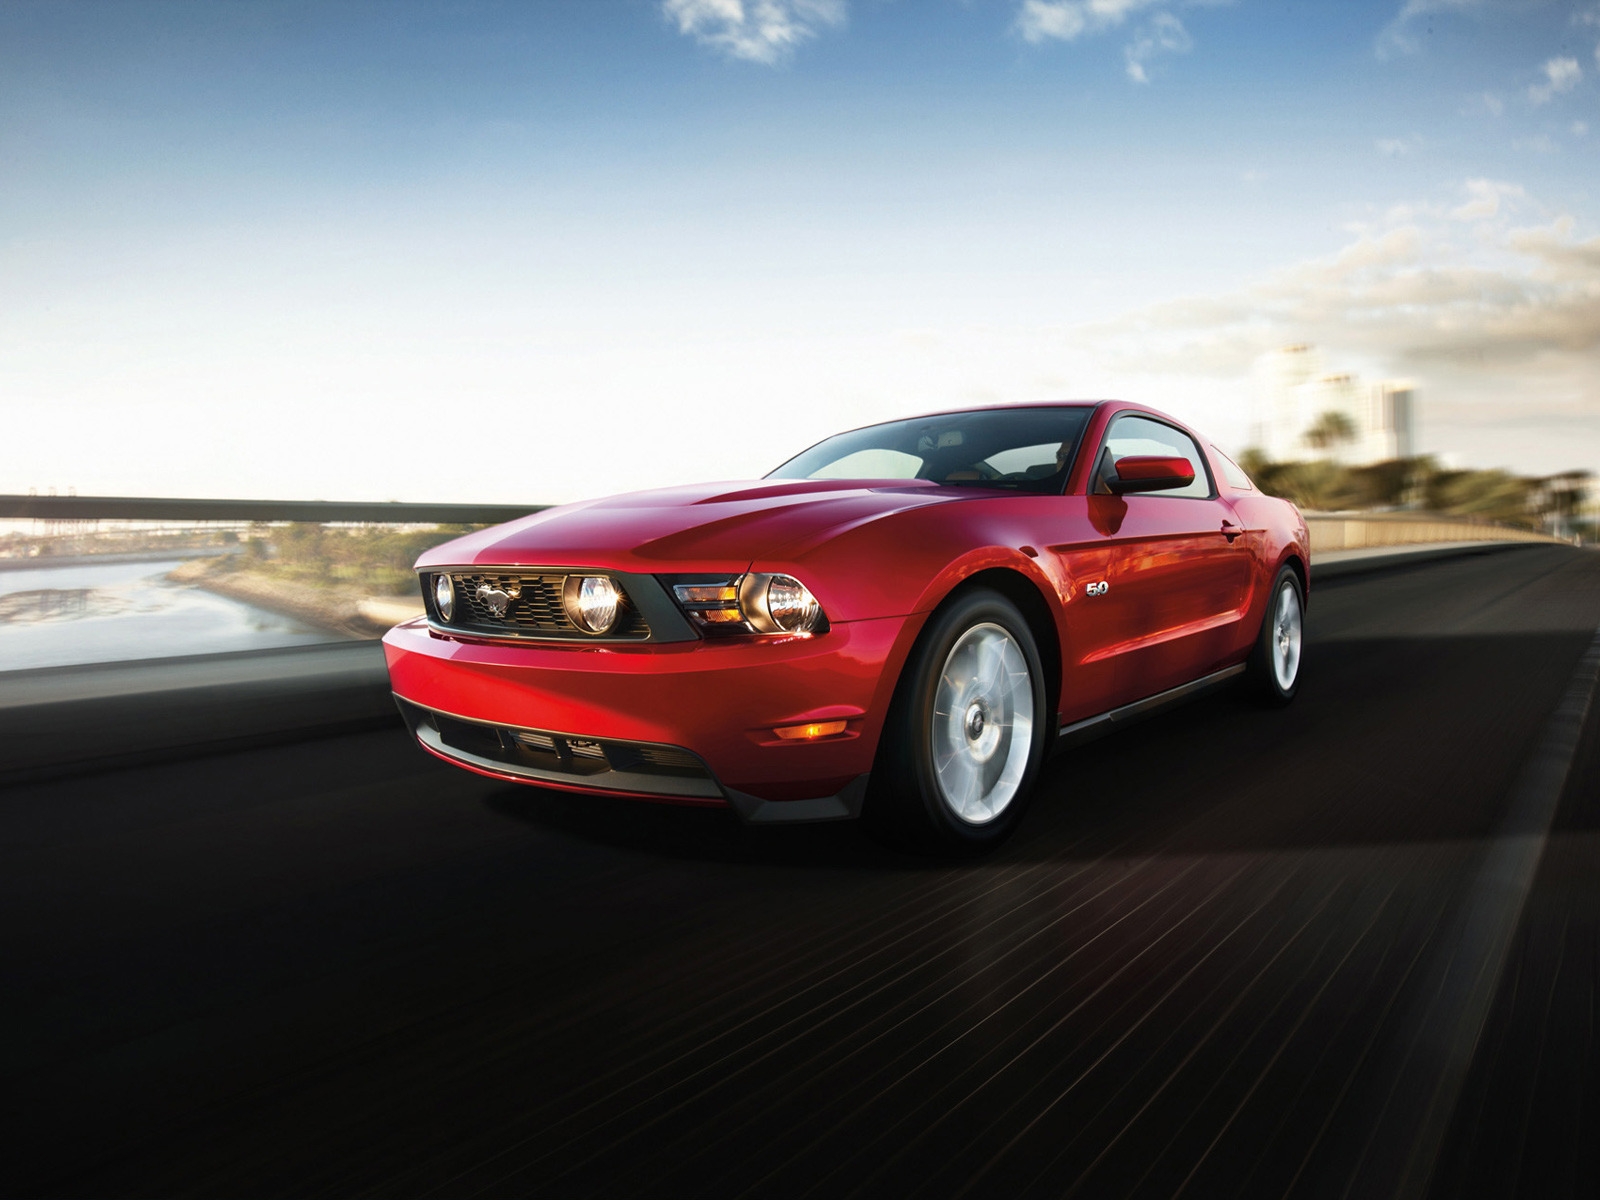 Ford Mustang GT 2012 for 1600 x 1200 resolution